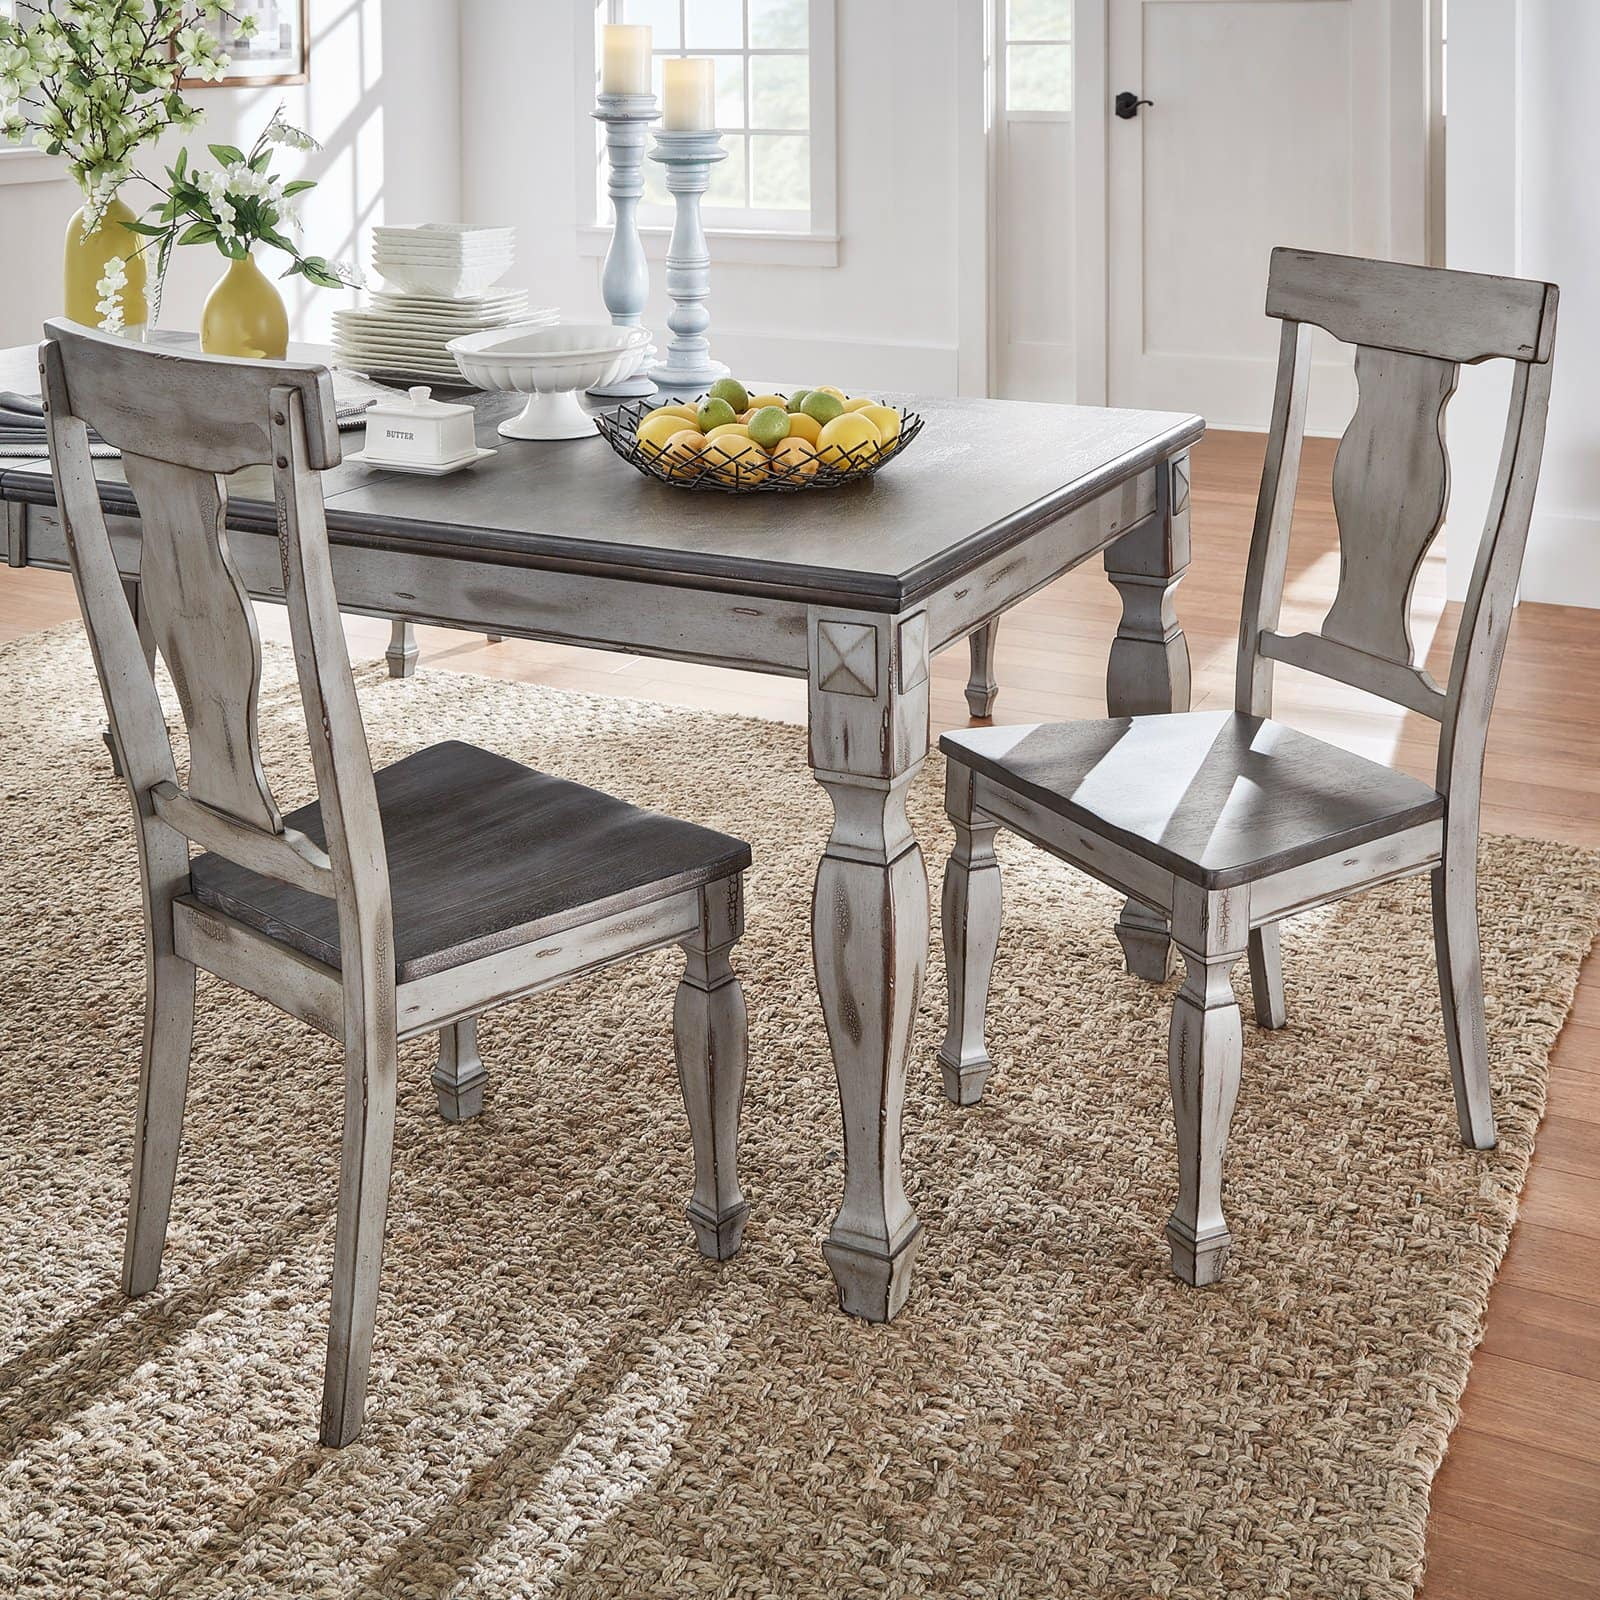 Humblenest Farmers Market Distressed, 2 Tone Dining Room Chairs